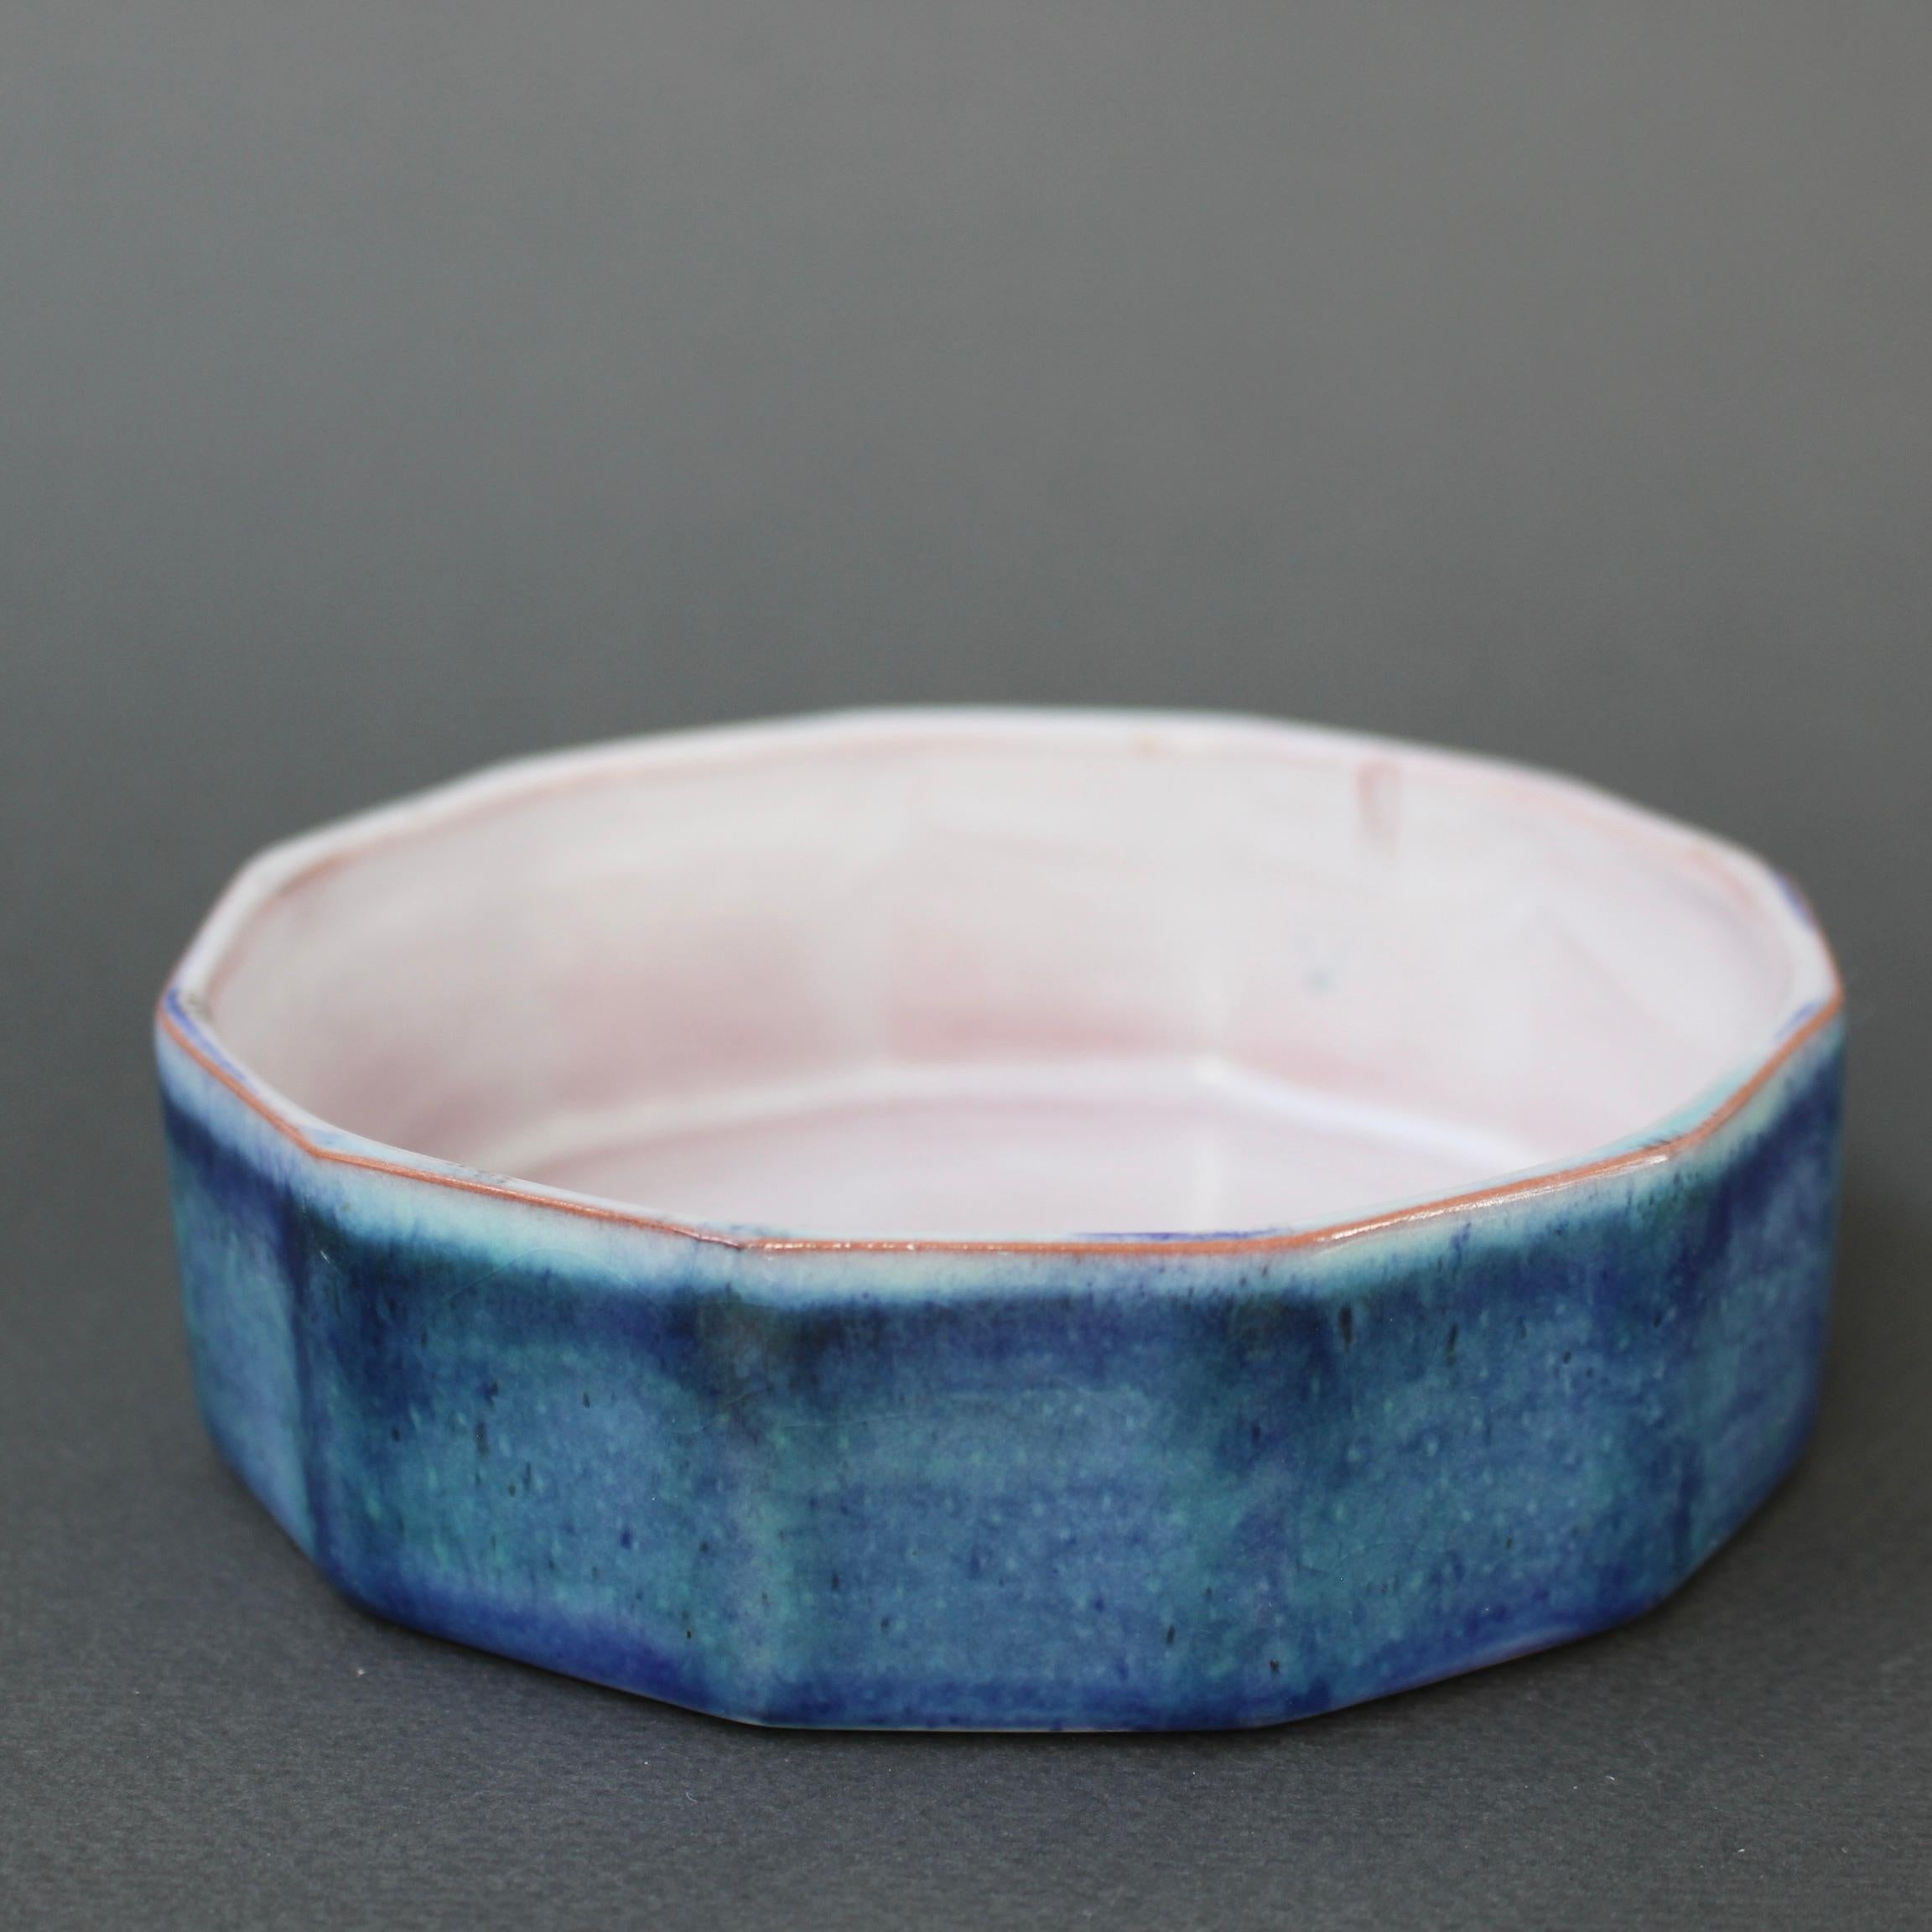 French ceramic decorative bowl / vide-poche by the Frères Cloutier (circa 1970s). A charming decorative yet utilitarian bowl created in the trademark pink and blue colours of the Cloutiers. It is immediately identifiable as theirs. With its subtle